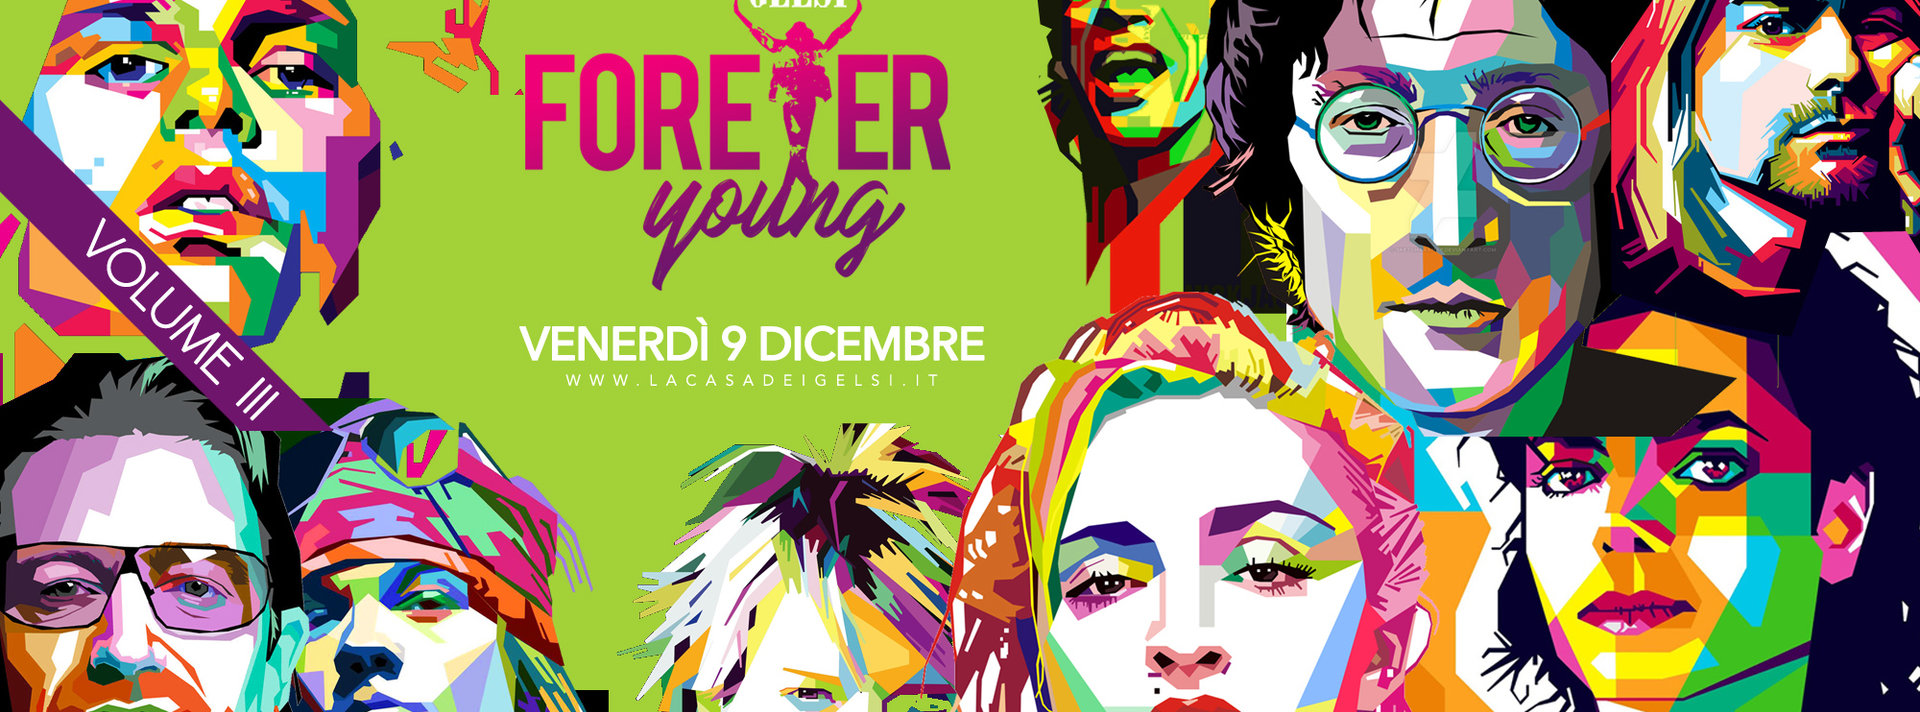 Forever Young Gelsi 9 dicembre 2016